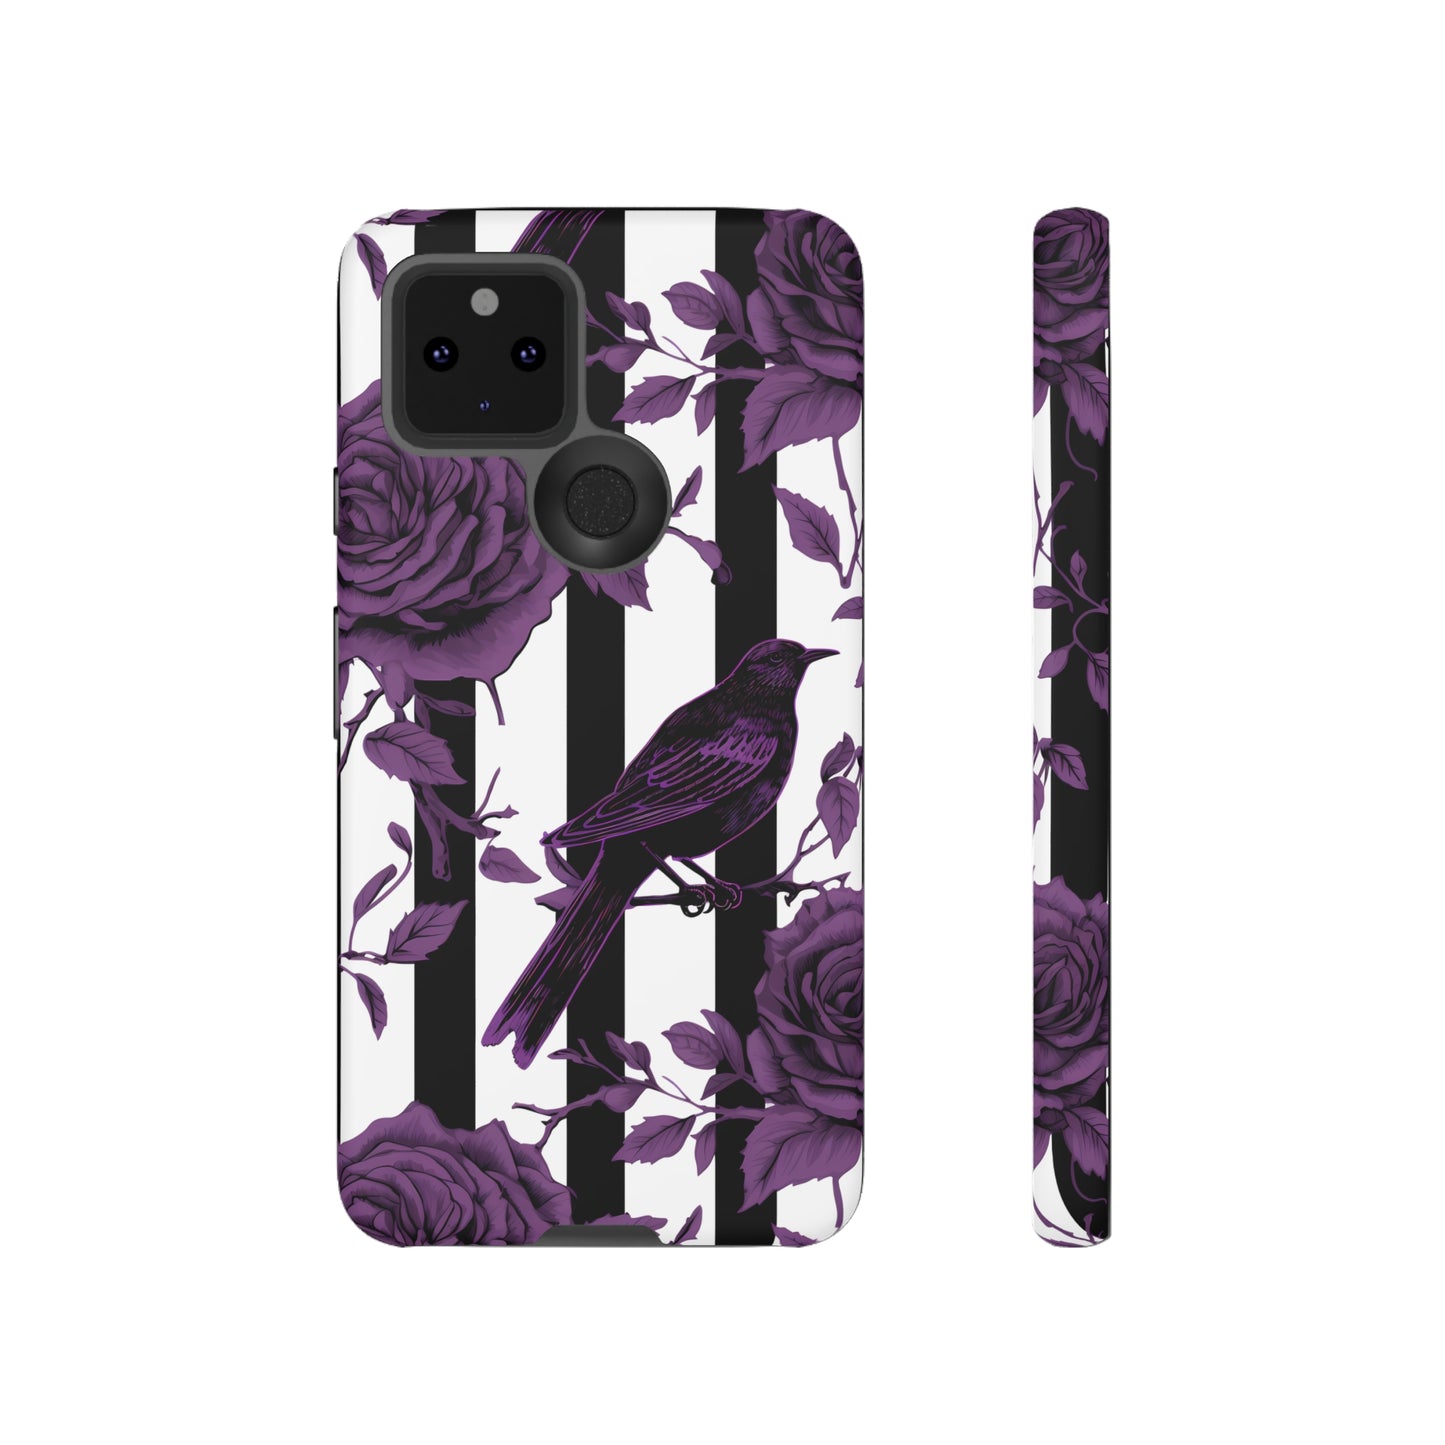 Striped Crows and Roses Tough Cases for iPhone Samsung Google PhonesPhone CaseVTZdesignsGoogle Pixel 5 5GMatteAccessoriescrowsGlossy